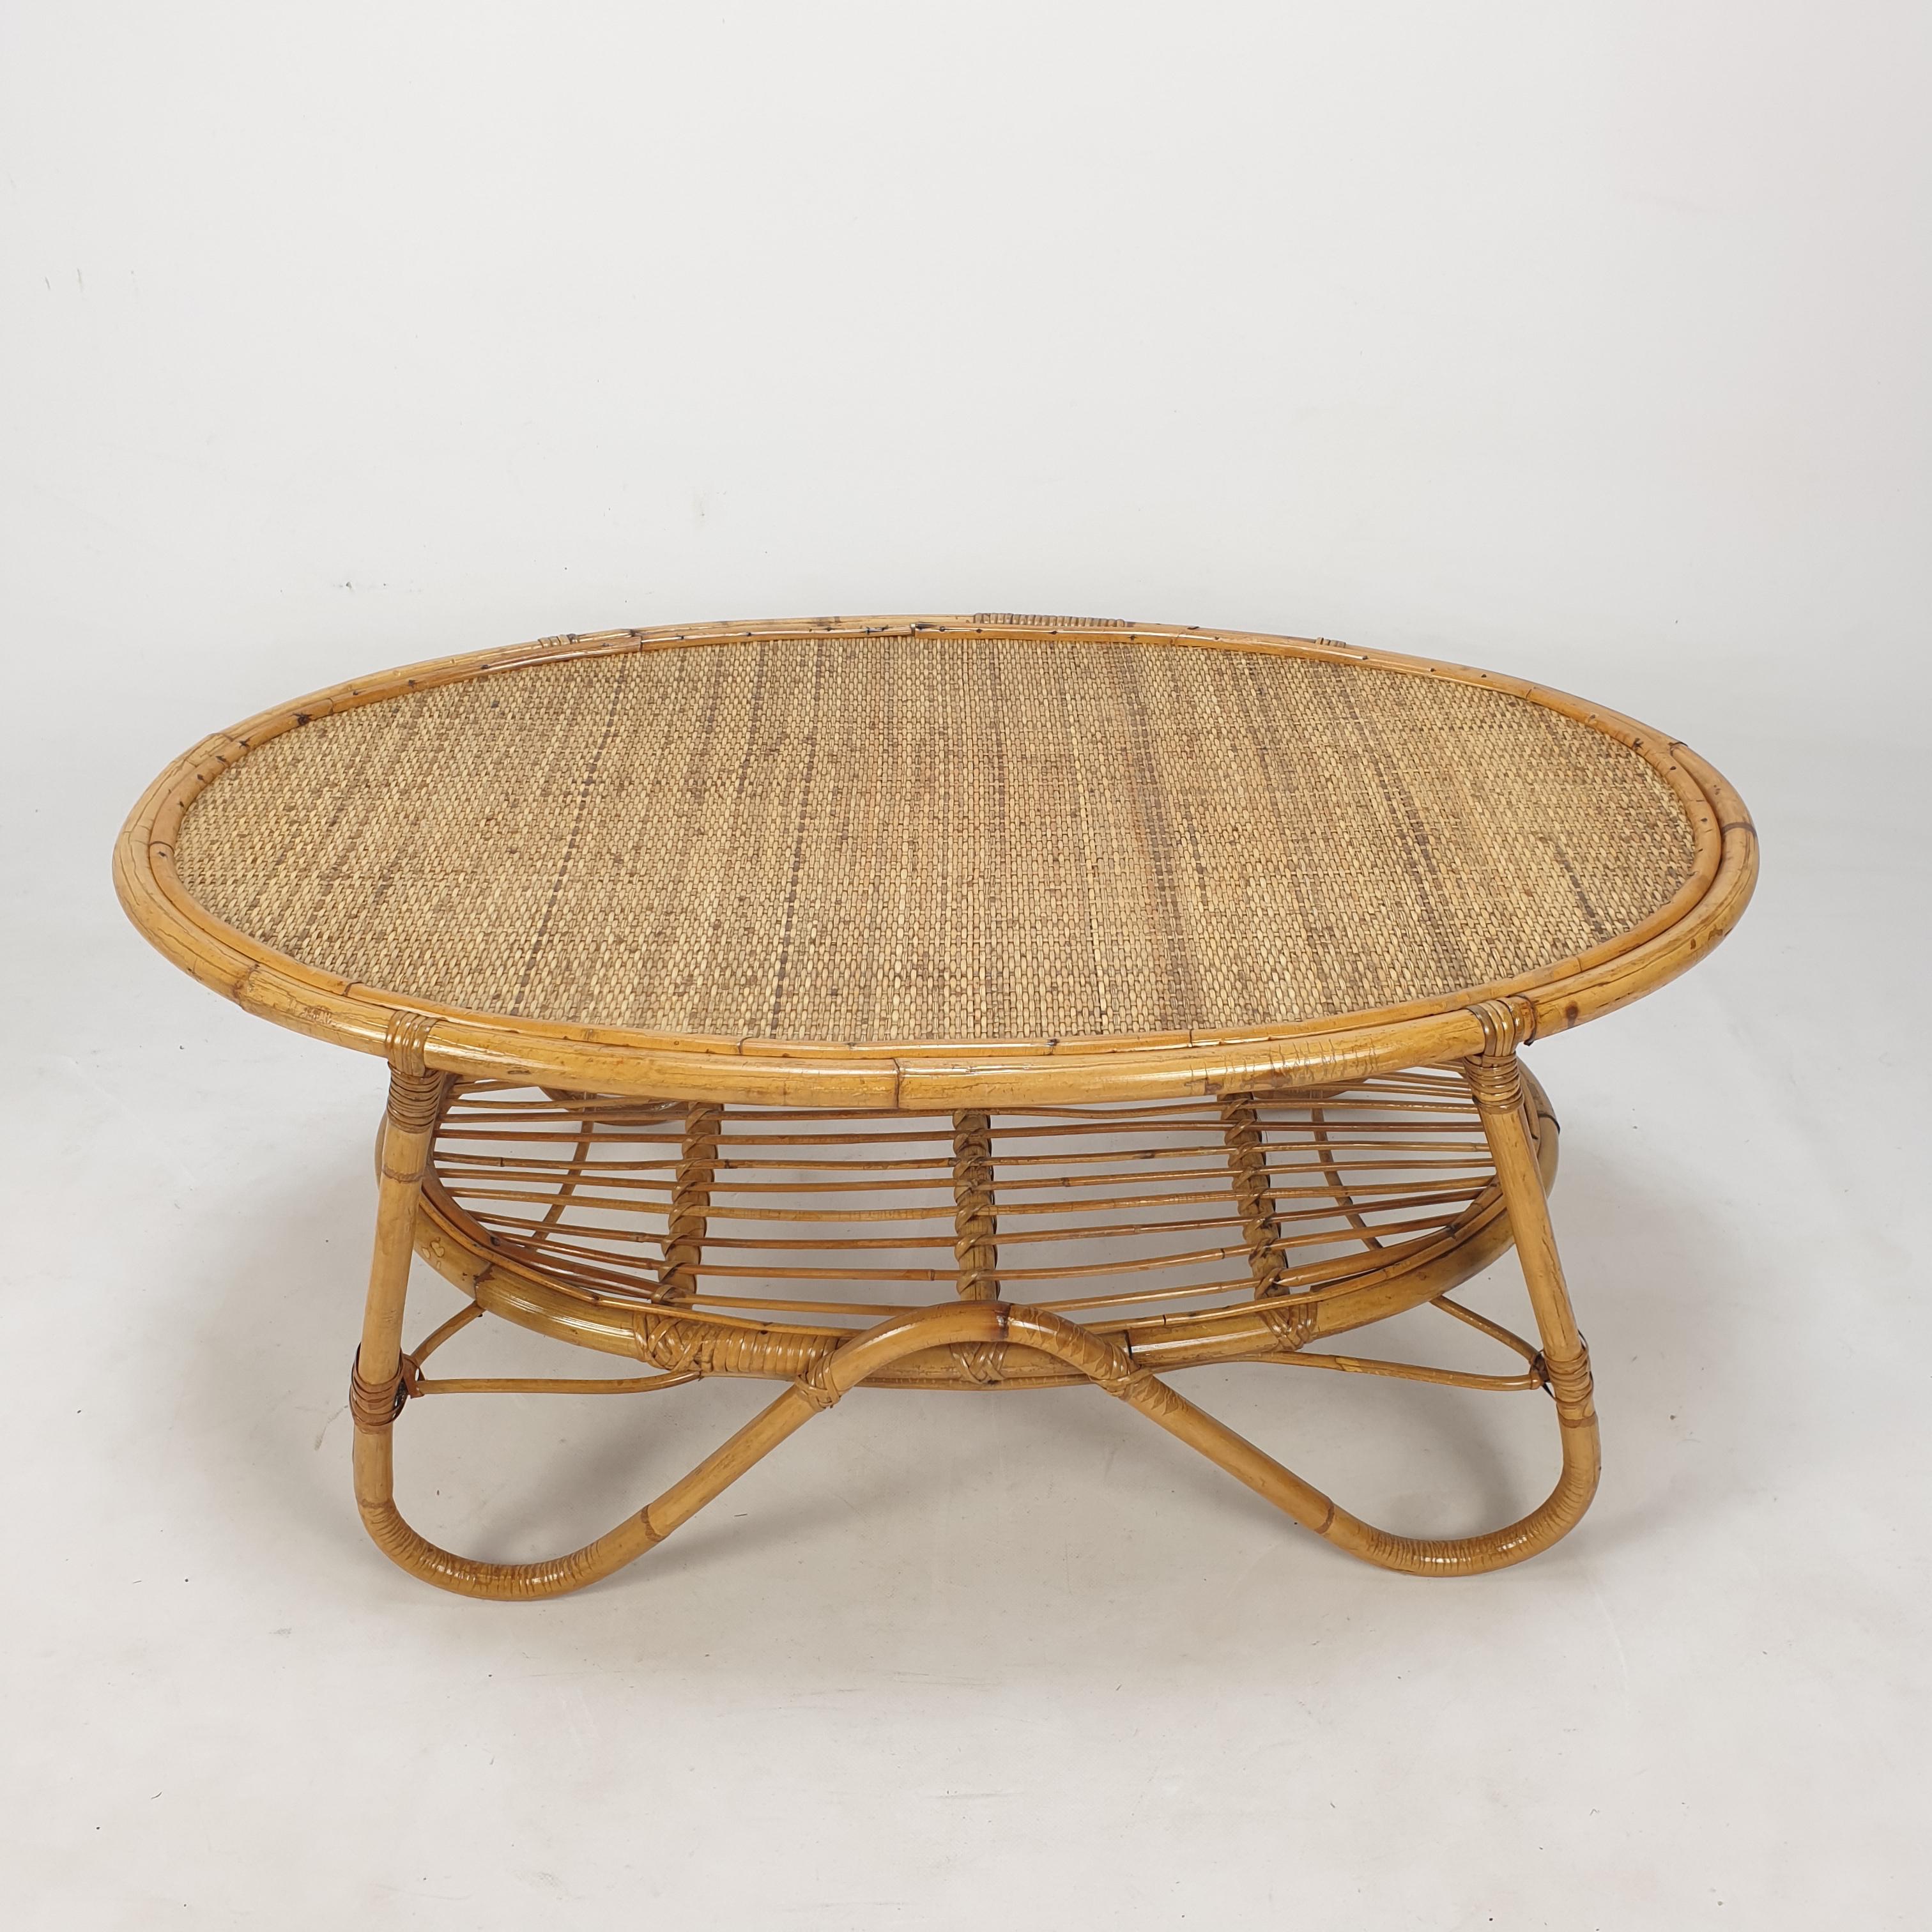 Hand-Crafted Italian Wicker and Rattan Coffee Table, 1960s